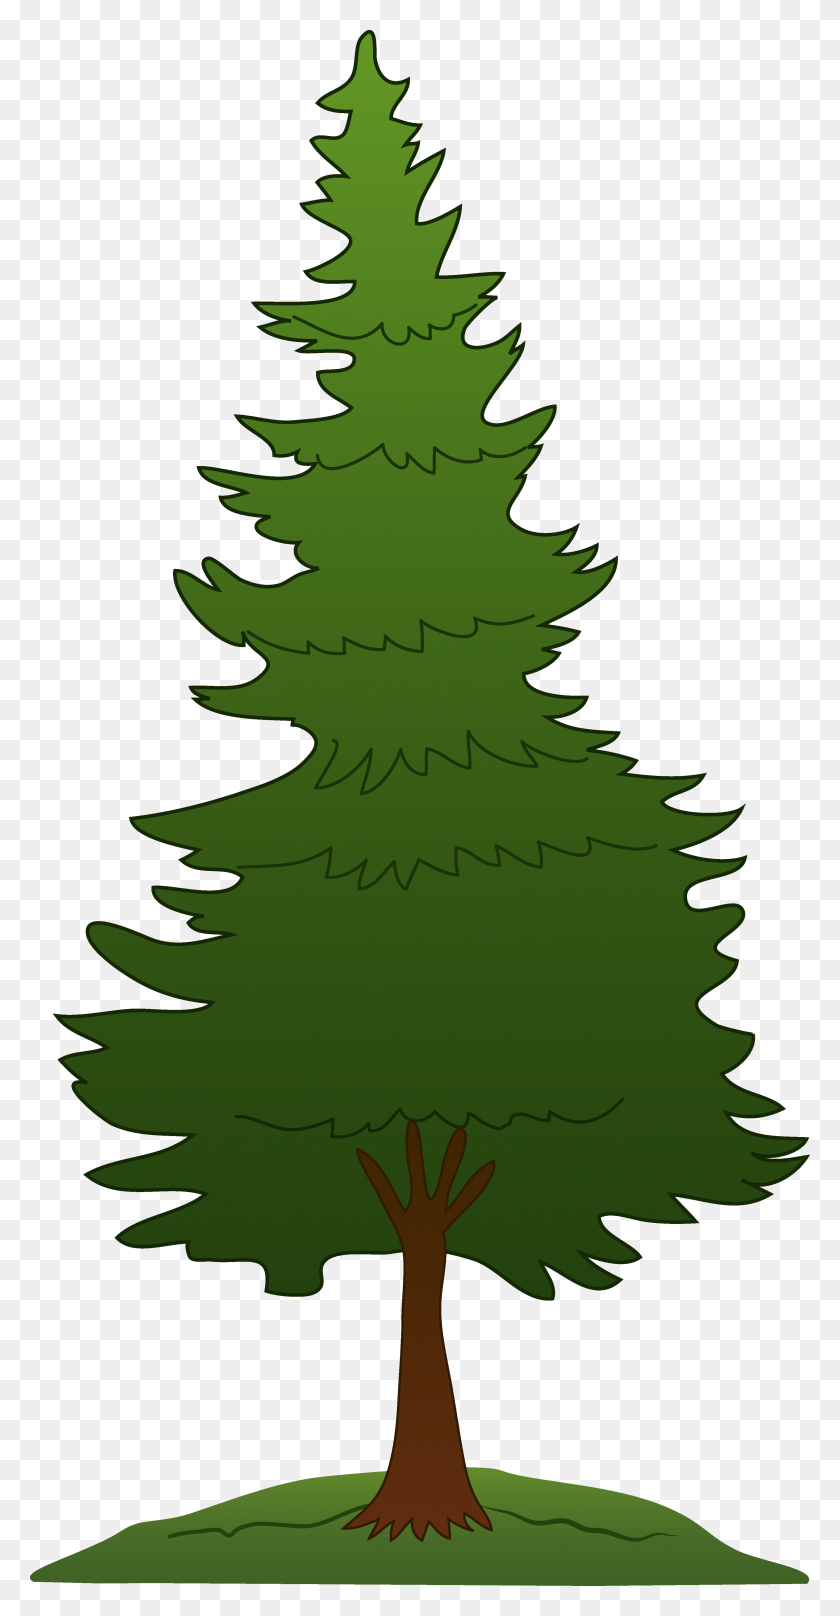 3256x6498 Tree Clip Art Pine Tree Clipart Free Projects To Try - Small Tree Clipart